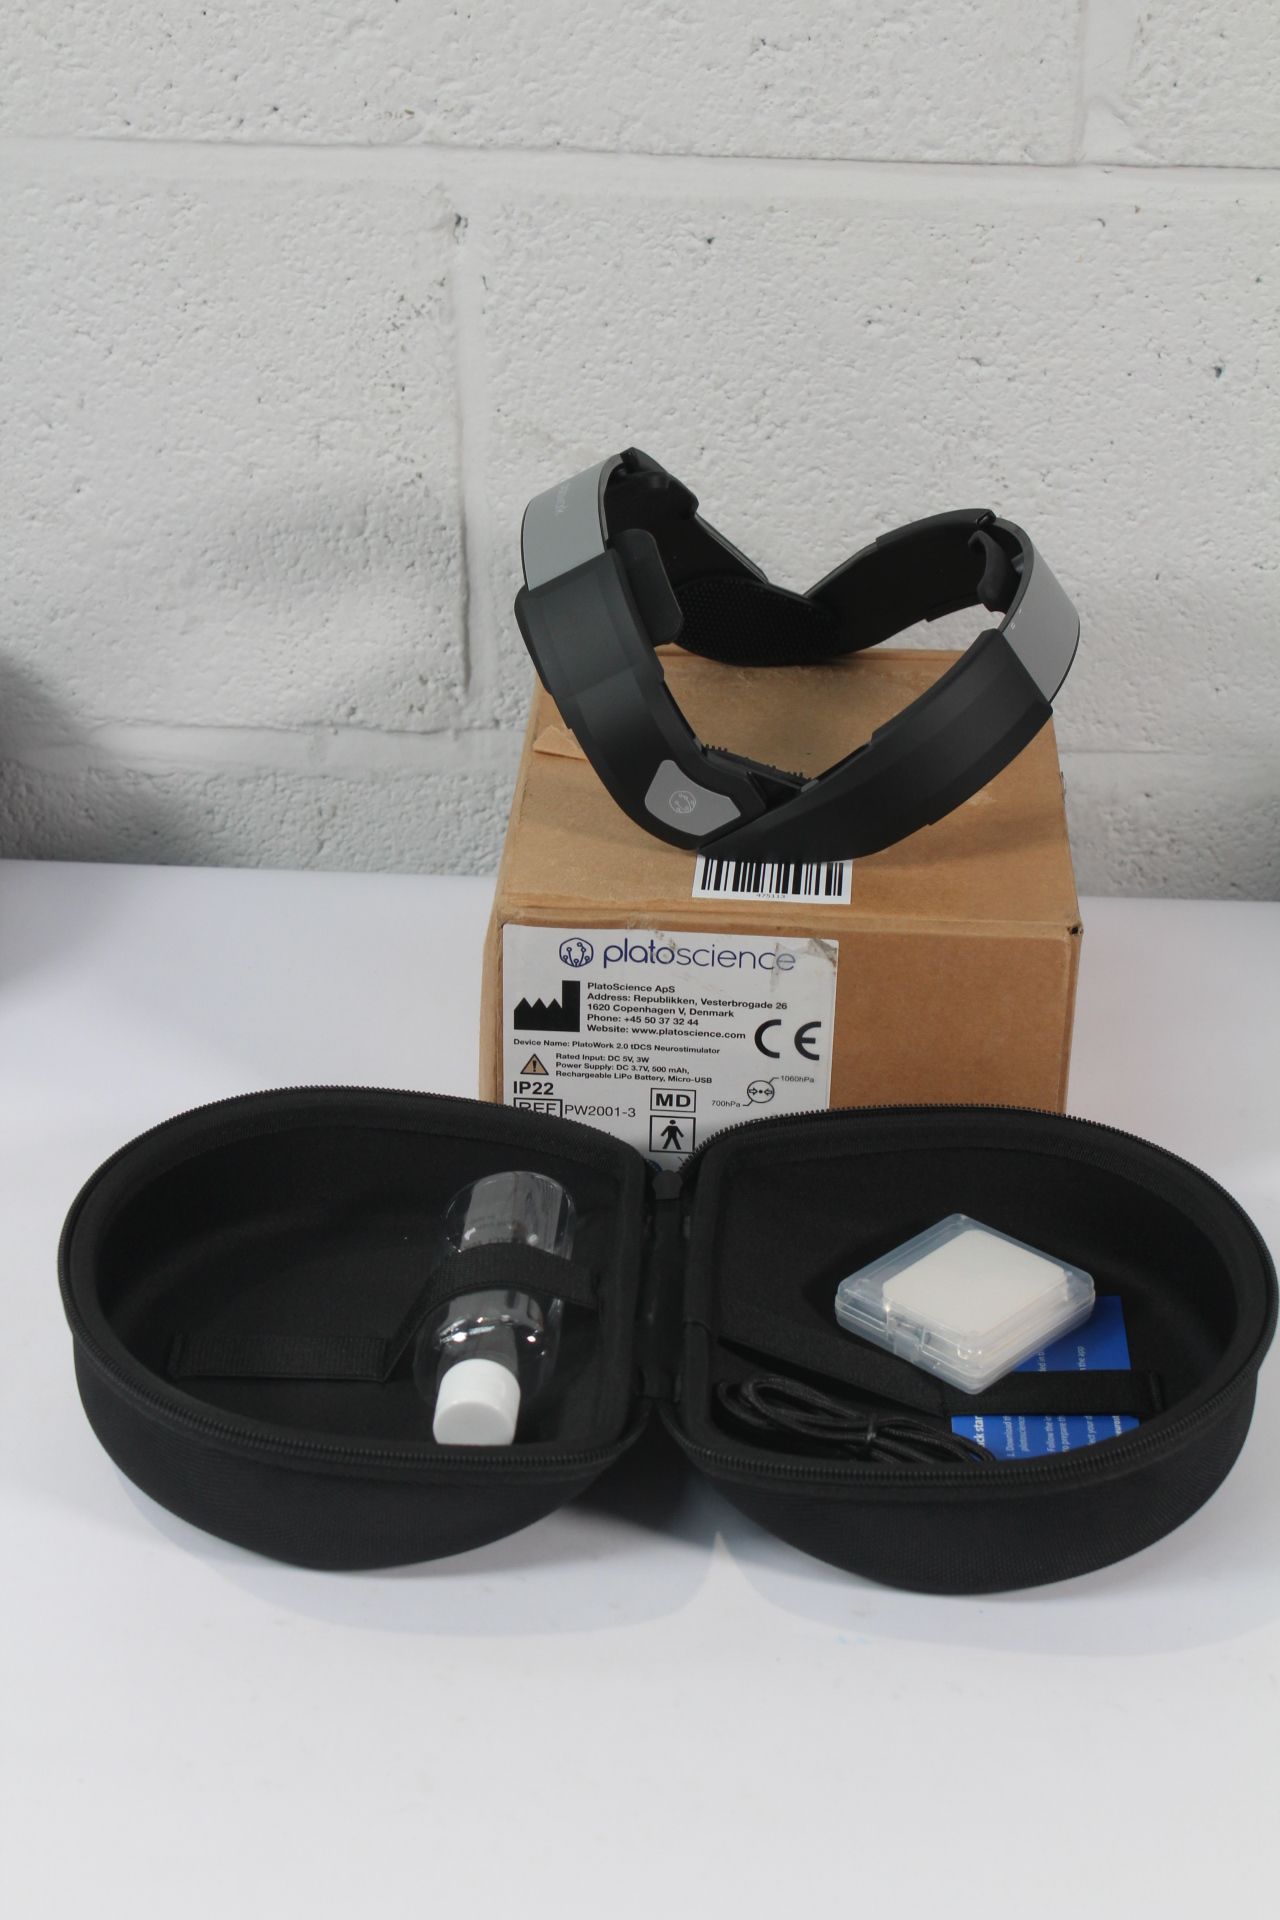 PlatoScience tDCS 2.0 Neurostimulator Headset. Item is Untested and May Be Incomplete. Viewing is Ad